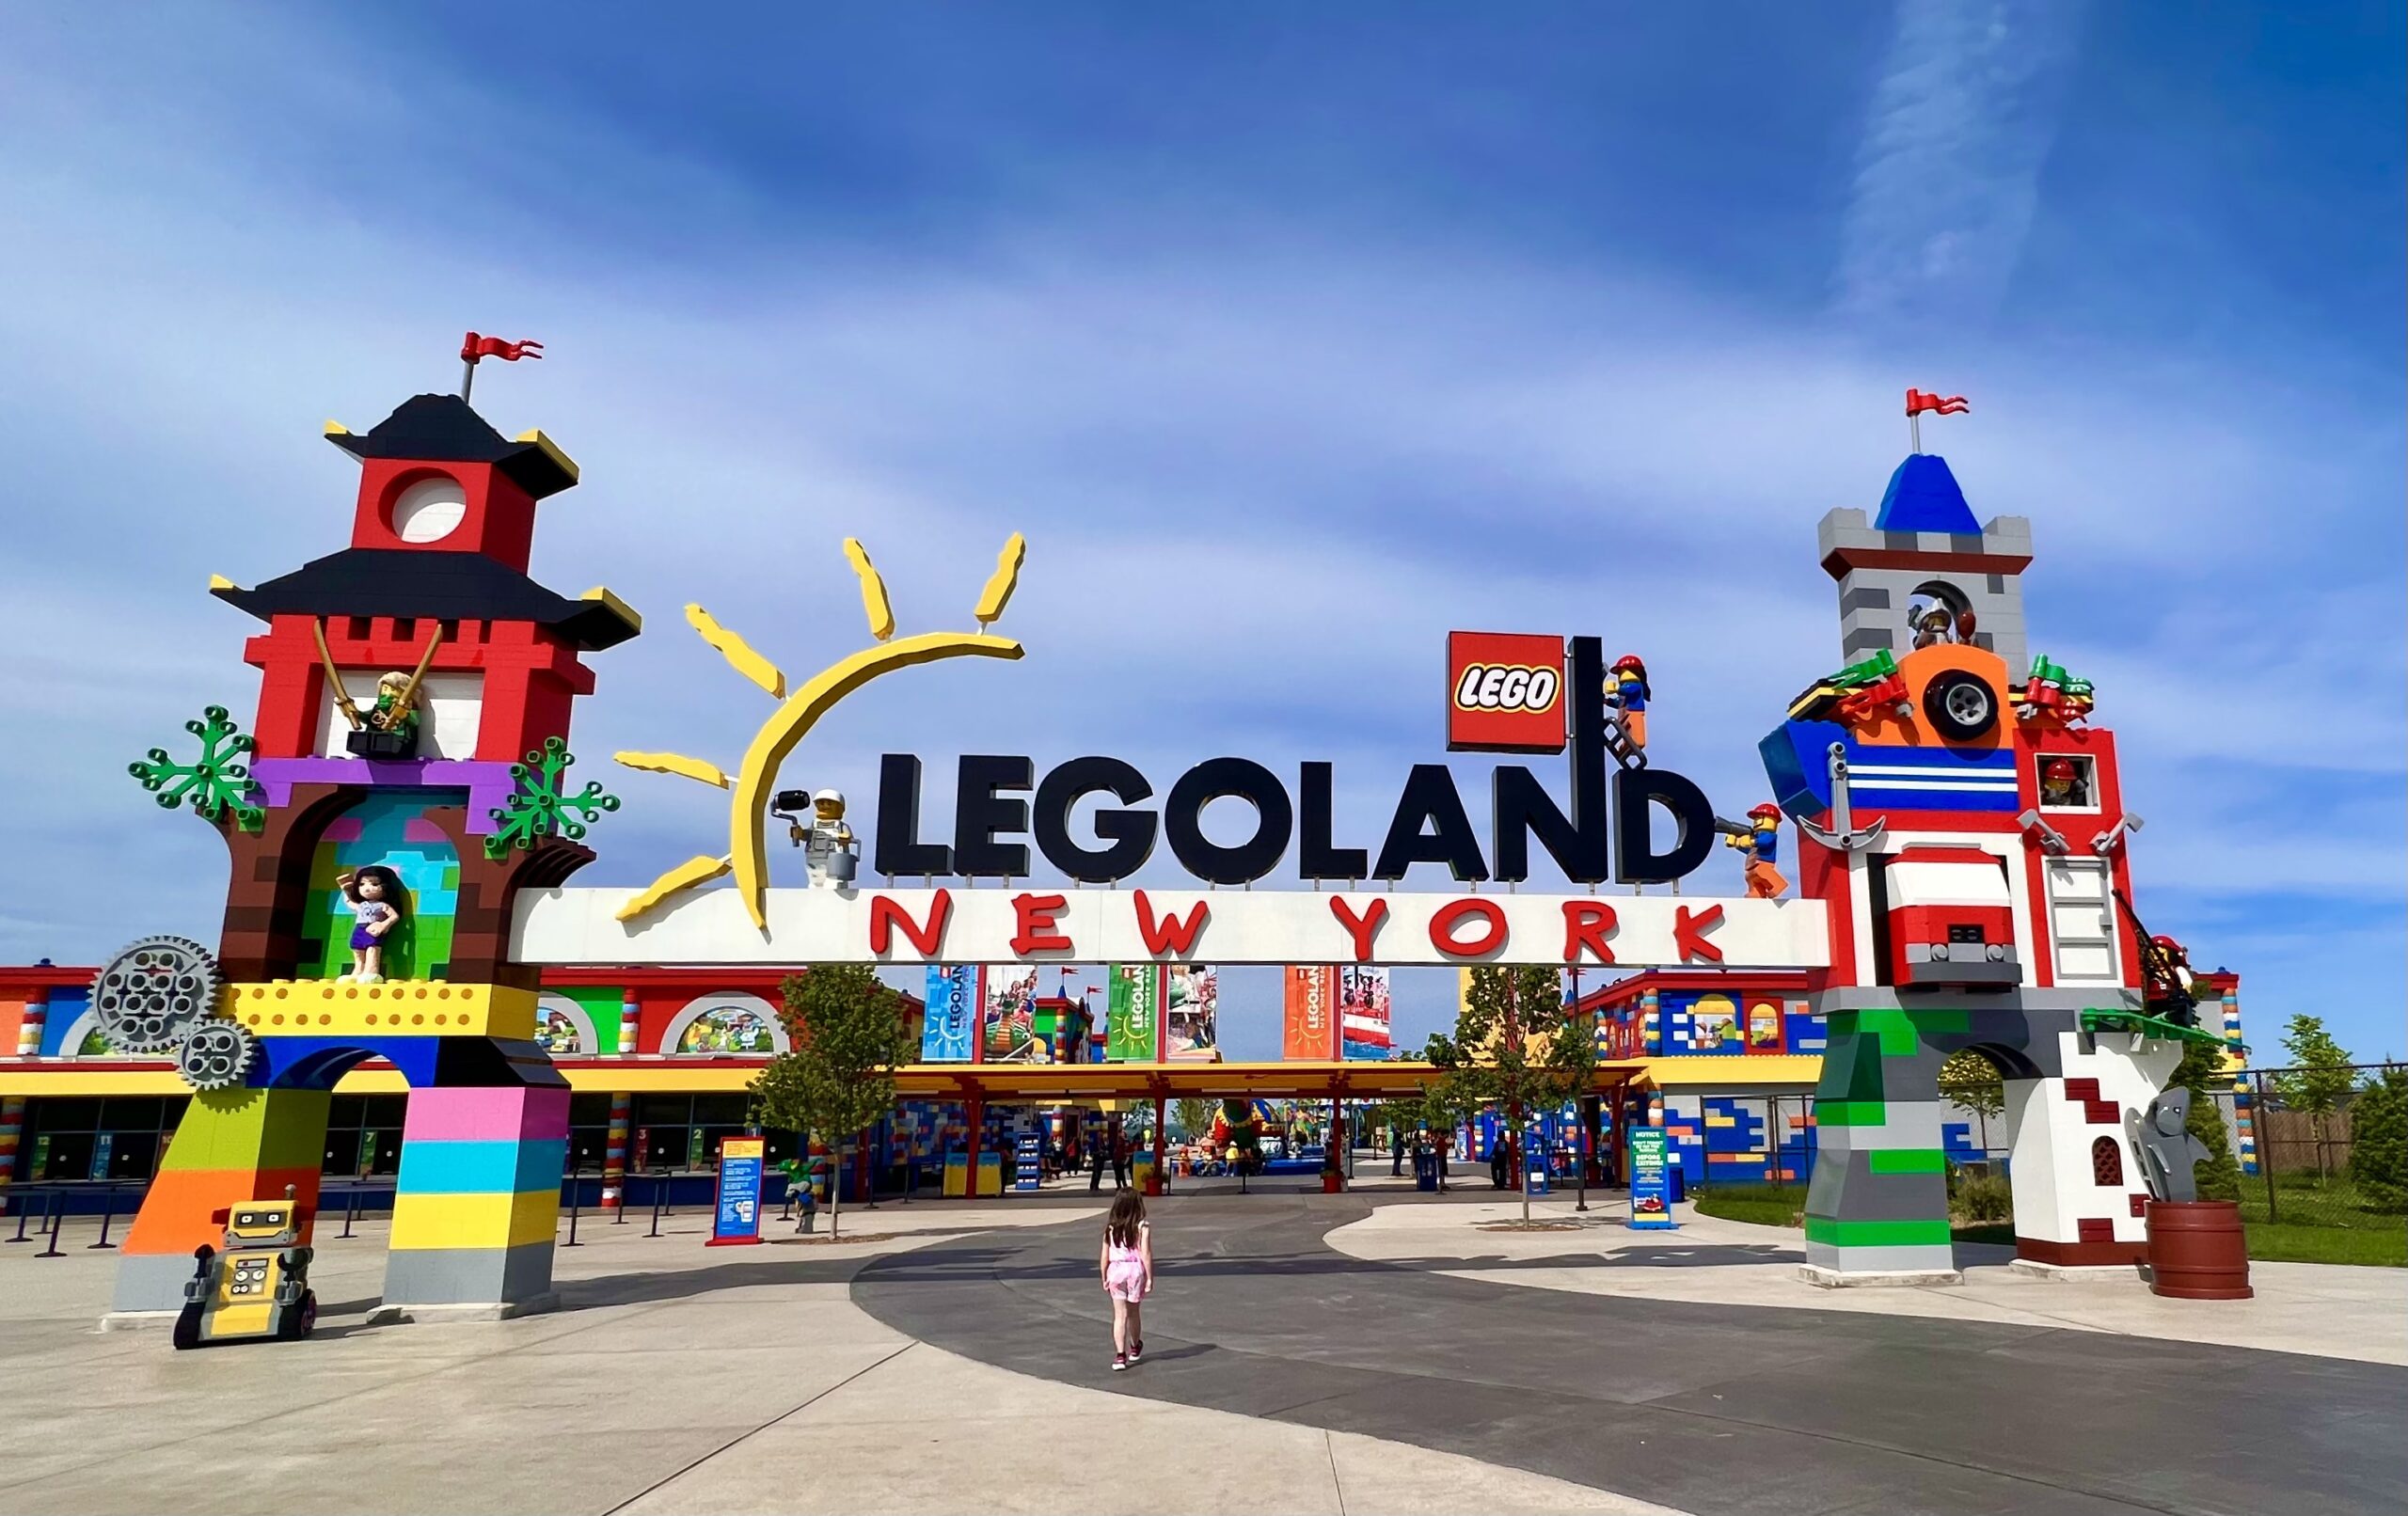 Krudt hænge Kostbar LEGOLAND New York Theme Park - Goshen, NY - Been There Done That with Kids